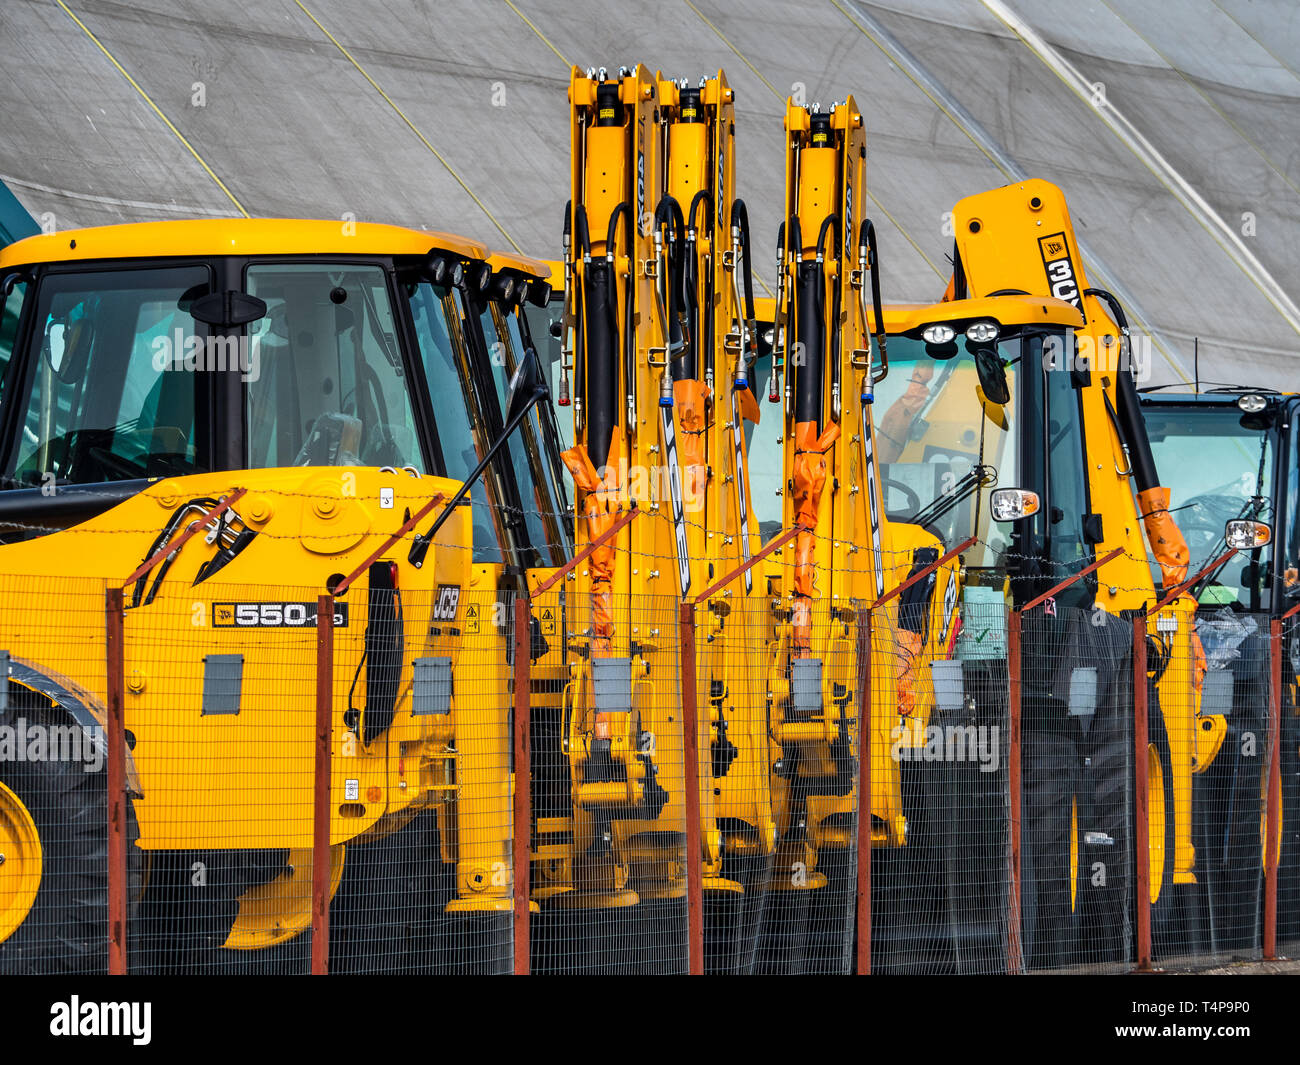 British Exports - JCB diggers or backhoe loaders  ready for export at the port of Harwich in Eastern England. Stock Photo